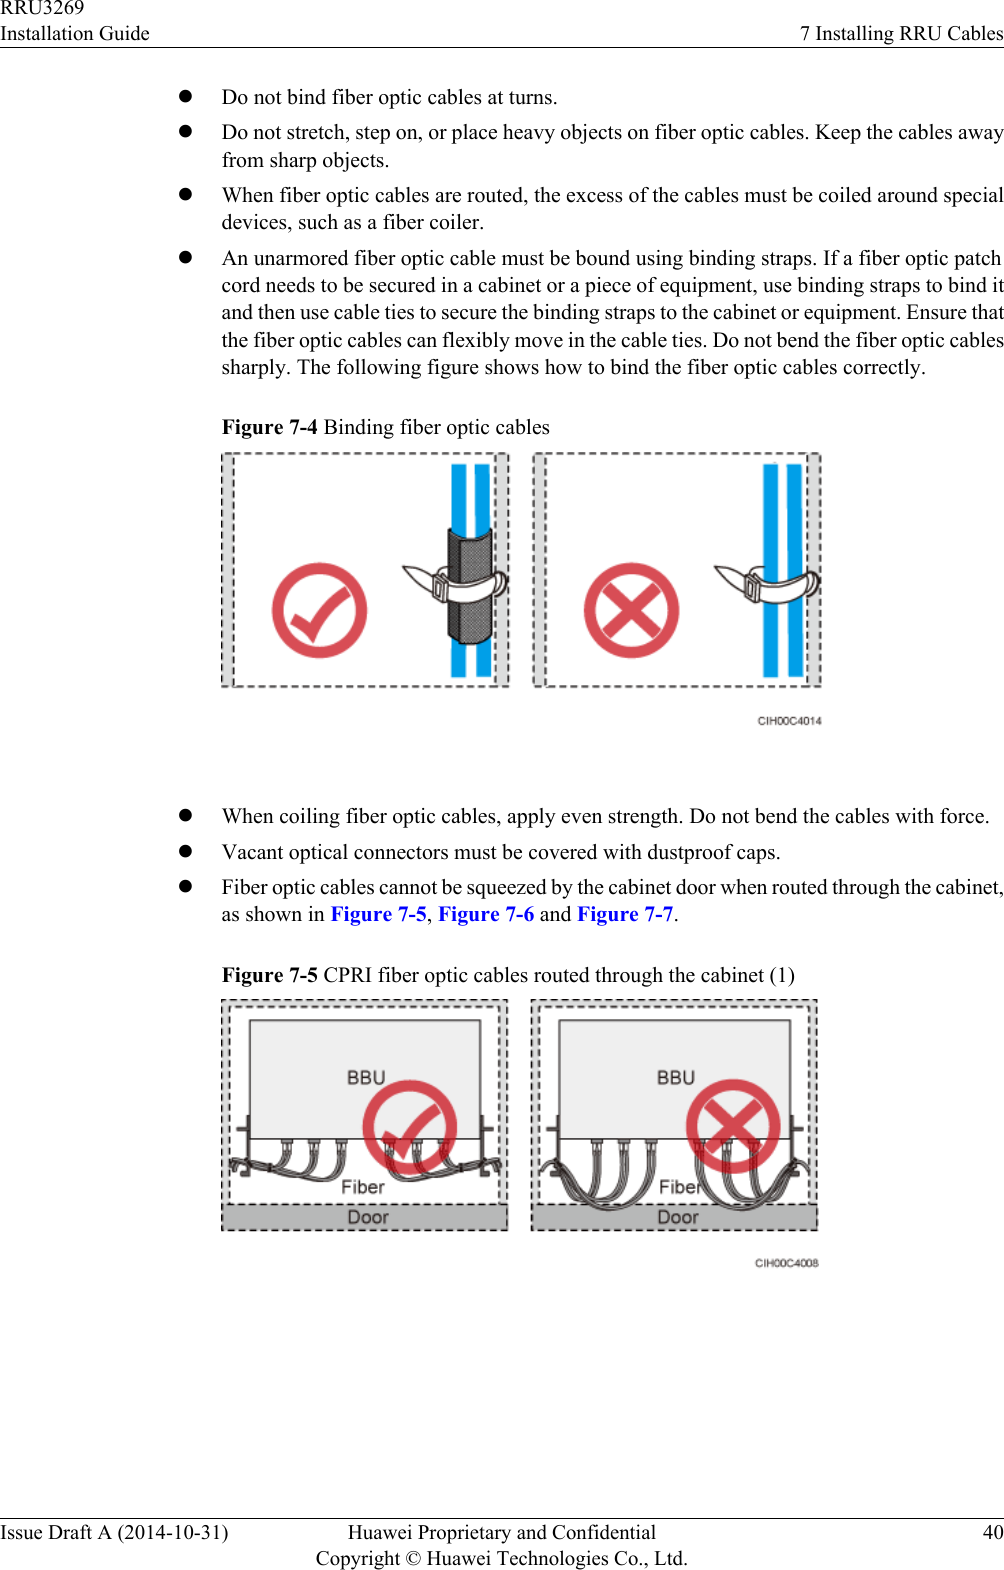 lDo not bind fiber optic cables at turns.lDo not stretch, step on, or place heavy objects on fiber optic cables. Keep the cables awayfrom sharp objects.lWhen fiber optic cables are routed, the excess of the cables must be coiled around specialdevices, such as a fiber coiler.lAn unarmored fiber optic cable must be bound using binding straps. If a fiber optic patchcord needs to be secured in a cabinet or a piece of equipment, use binding straps to bind itand then use cable ties to secure the binding straps to the cabinet or equipment. Ensure thatthe fiber optic cables can flexibly move in the cable ties. Do not bend the fiber optic cablessharply. The following figure shows how to bind the fiber optic cables correctly.Figure 7-4 Binding fiber optic cables lWhen coiling fiber optic cables, apply even strength. Do not bend the cables with force.lVacant optical connectors must be covered with dustproof caps.lFiber optic cables cannot be squeezed by the cabinet door when routed through the cabinet,as shown in Figure 7-5, Figure 7-6 and Figure 7-7.Figure 7-5 CPRI fiber optic cables routed through the cabinet (1) RRU3269Installation Guide 7 Installing RRU CablesIssue Draft A (2014-10-31) Huawei Proprietary and ConfidentialCopyright © Huawei Technologies Co., Ltd.40